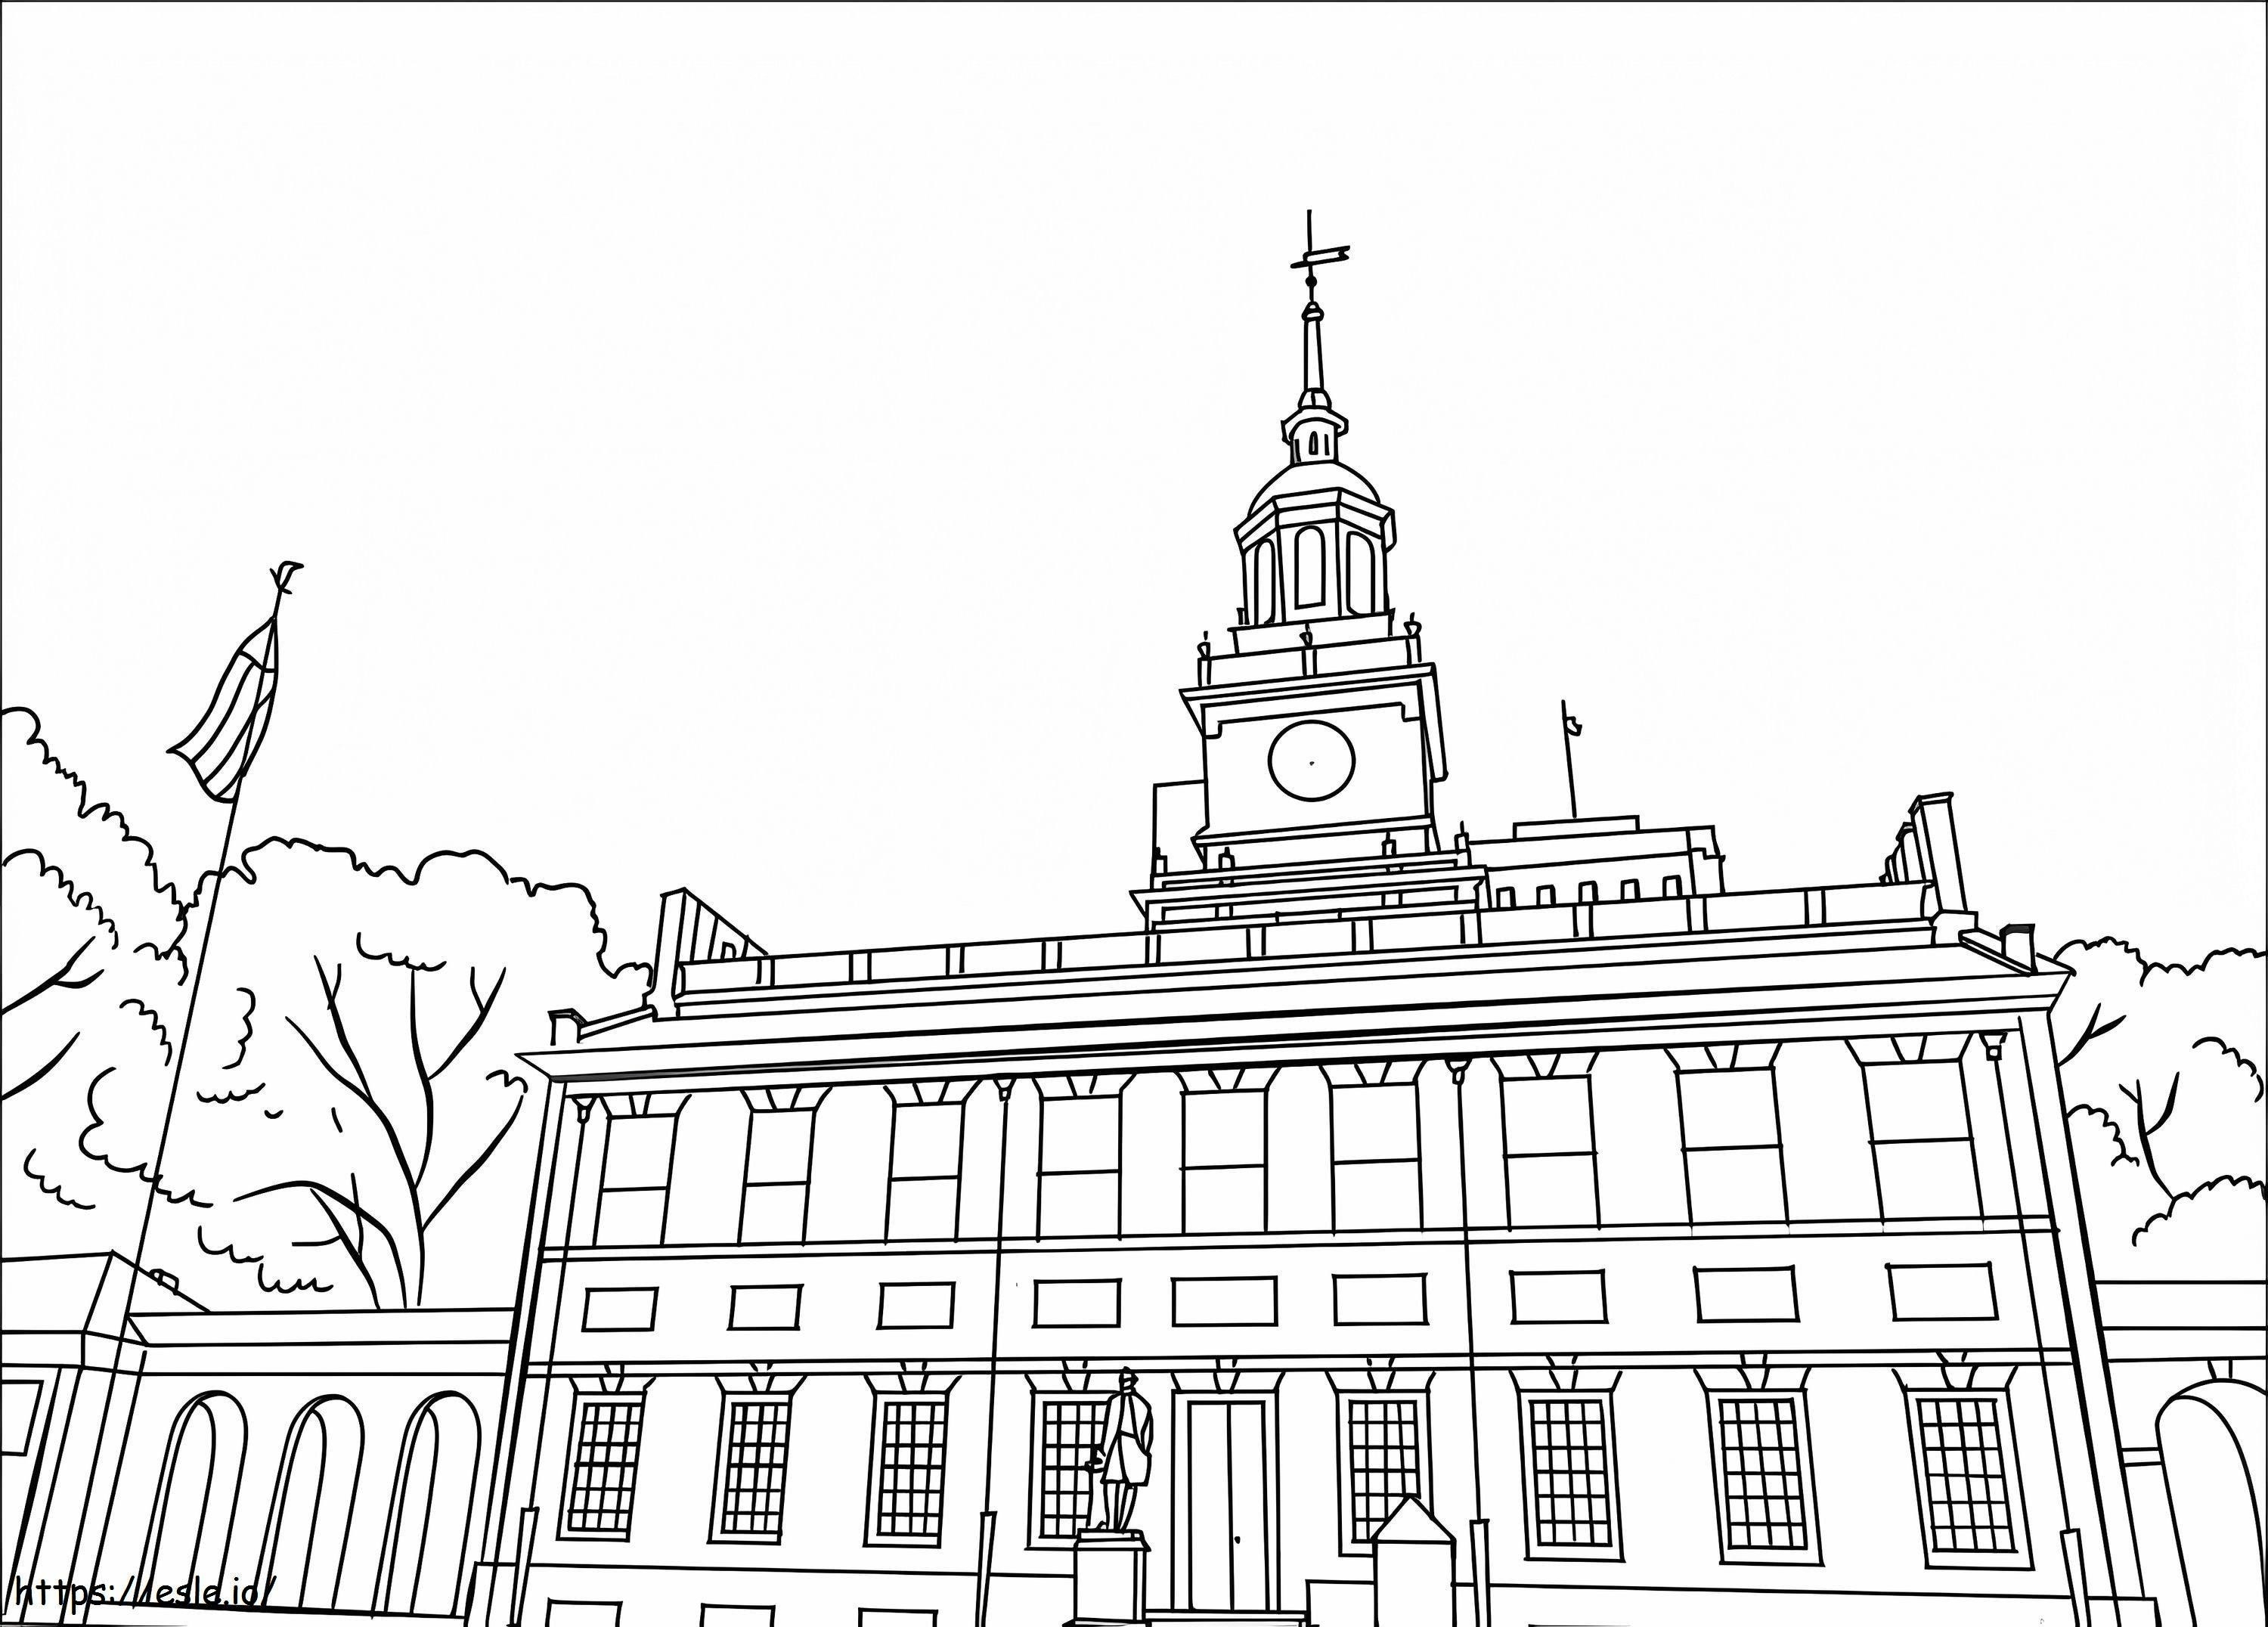 Independence Hall coloring page